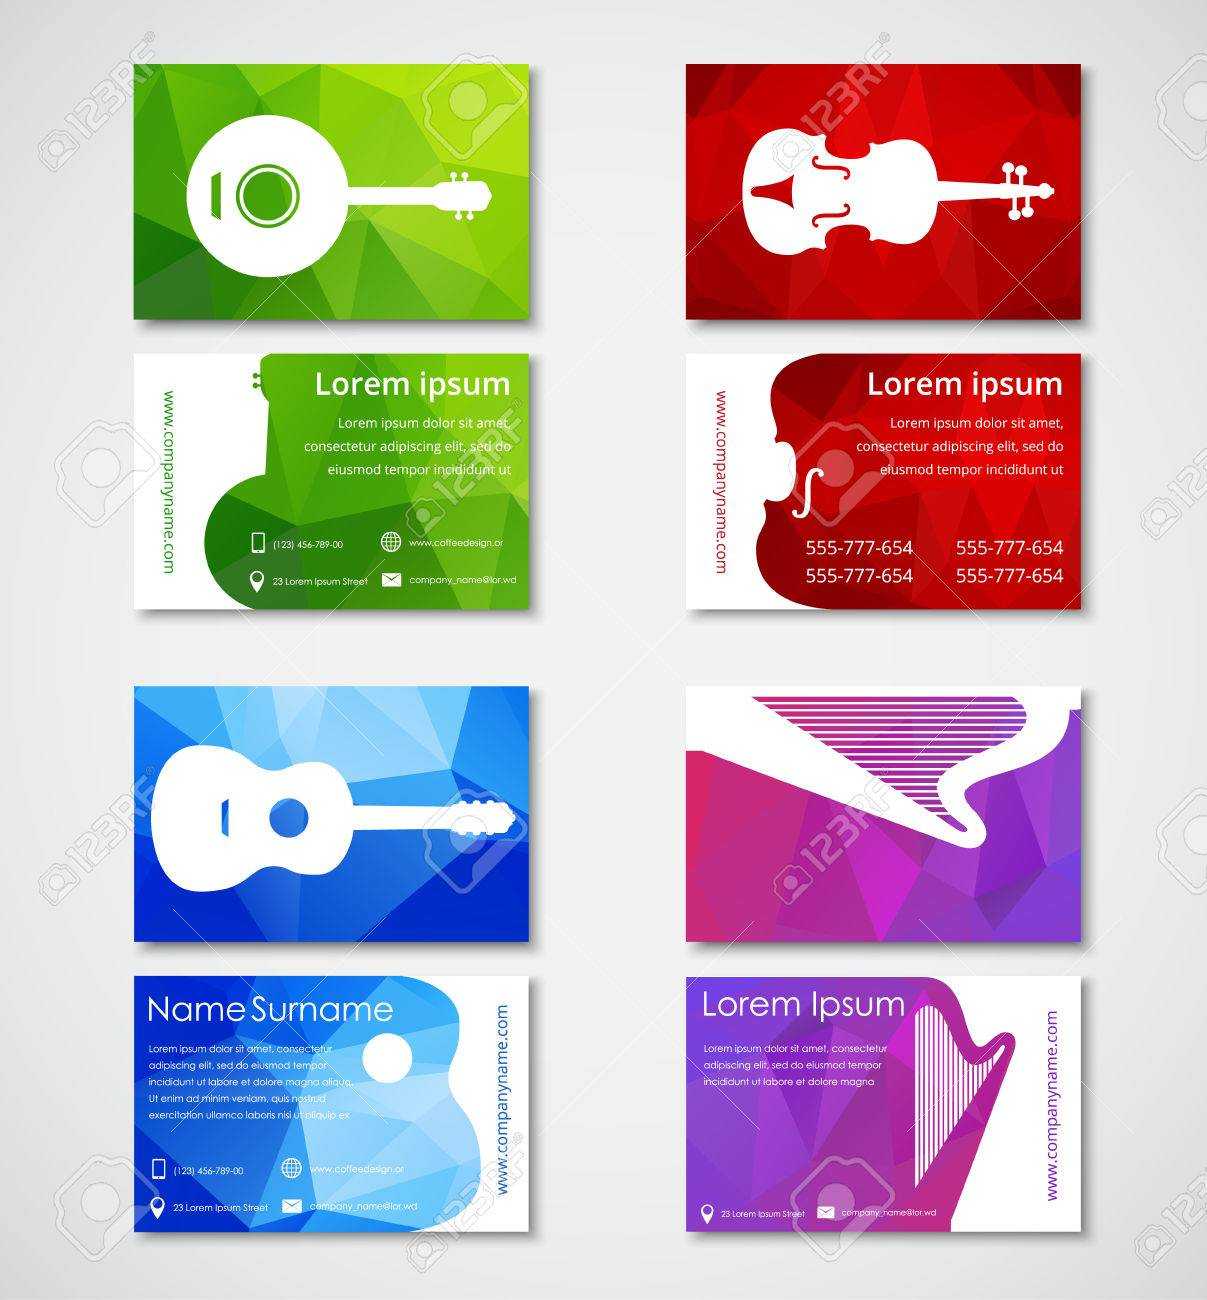 Templates For Visiting Cards ] – 100 Free Business Cards Psd With Regard To Advocare Business Card Template